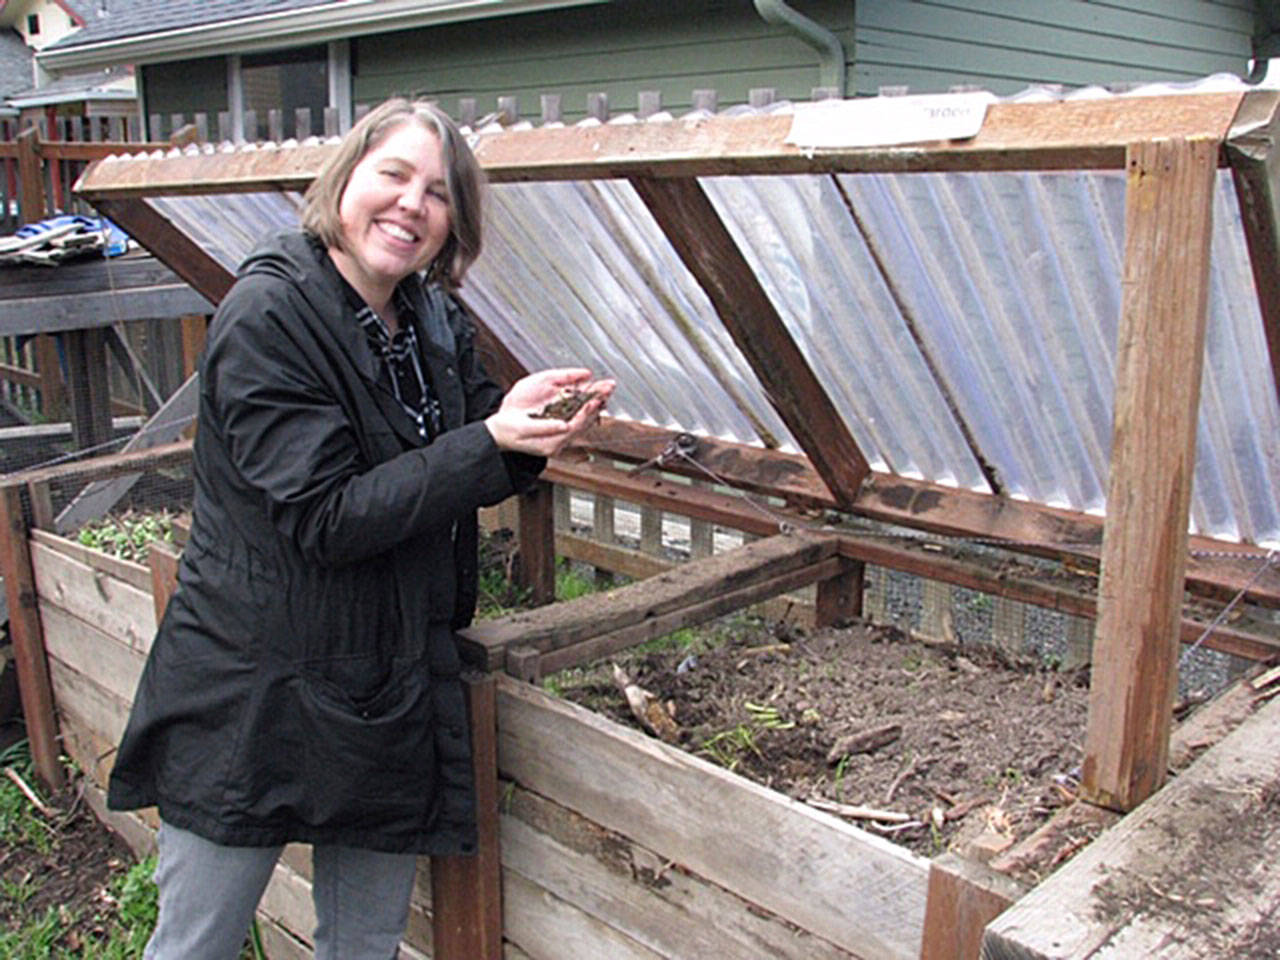 Meggan Uecker leads a Green Thumb Garden Tips lecture about how home gardeners can integrate composting into any size garden or space on May 23. Submitted photo